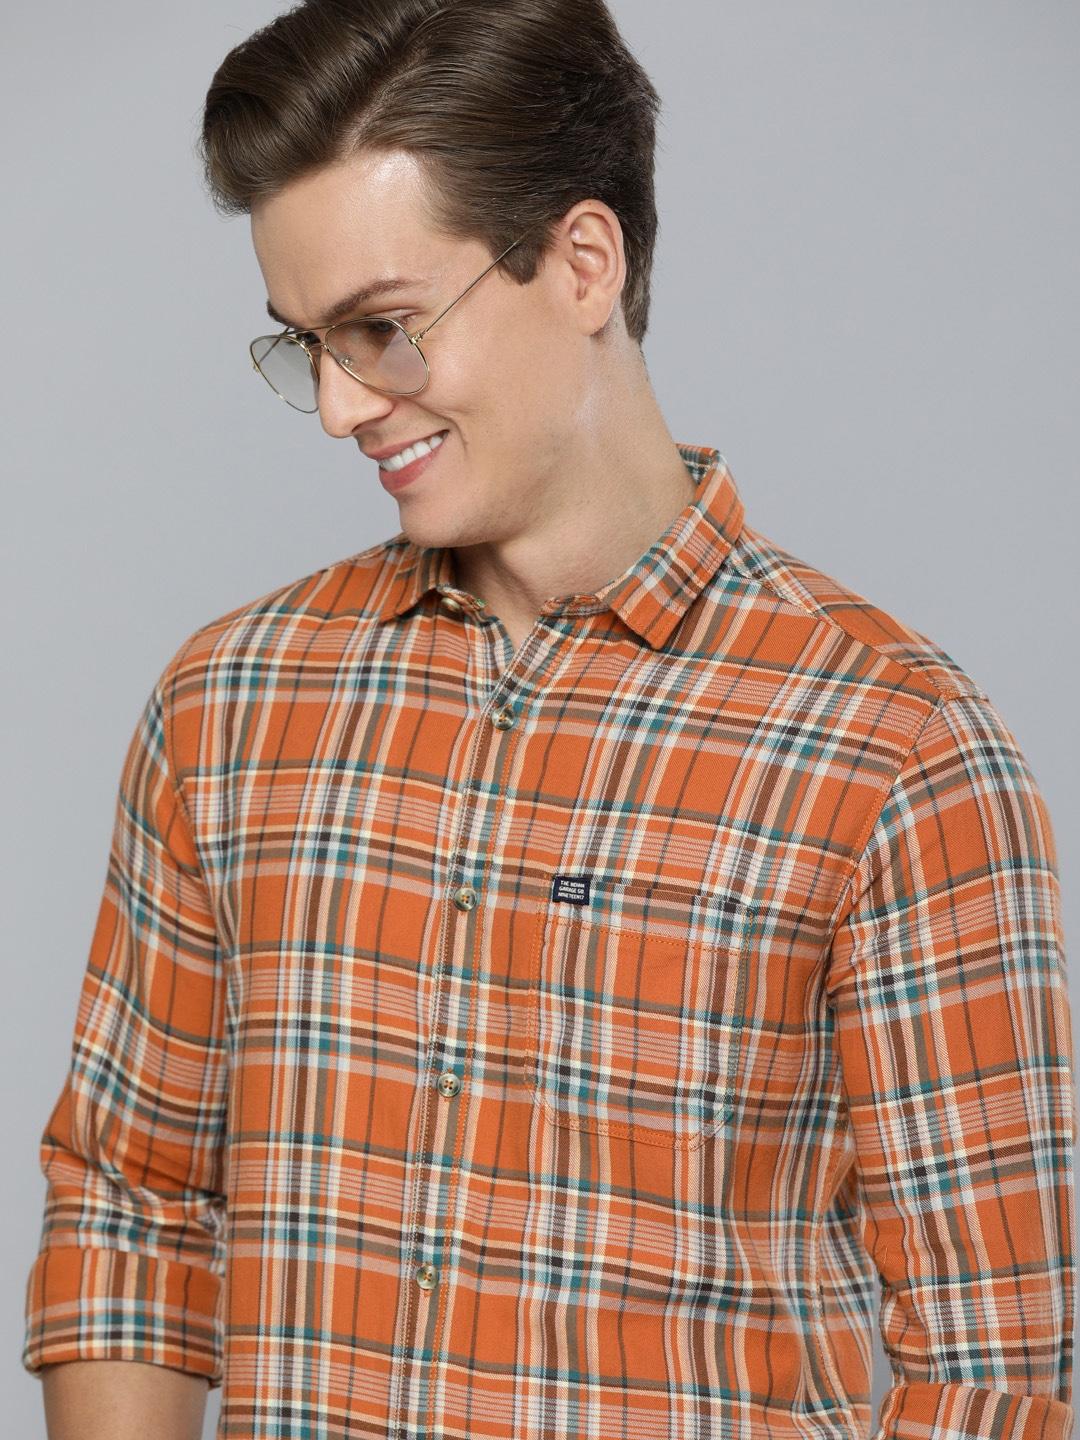 the-indian-garage-co-men-orange-&-teal-blue-slim-fit-checked-casual-shirt